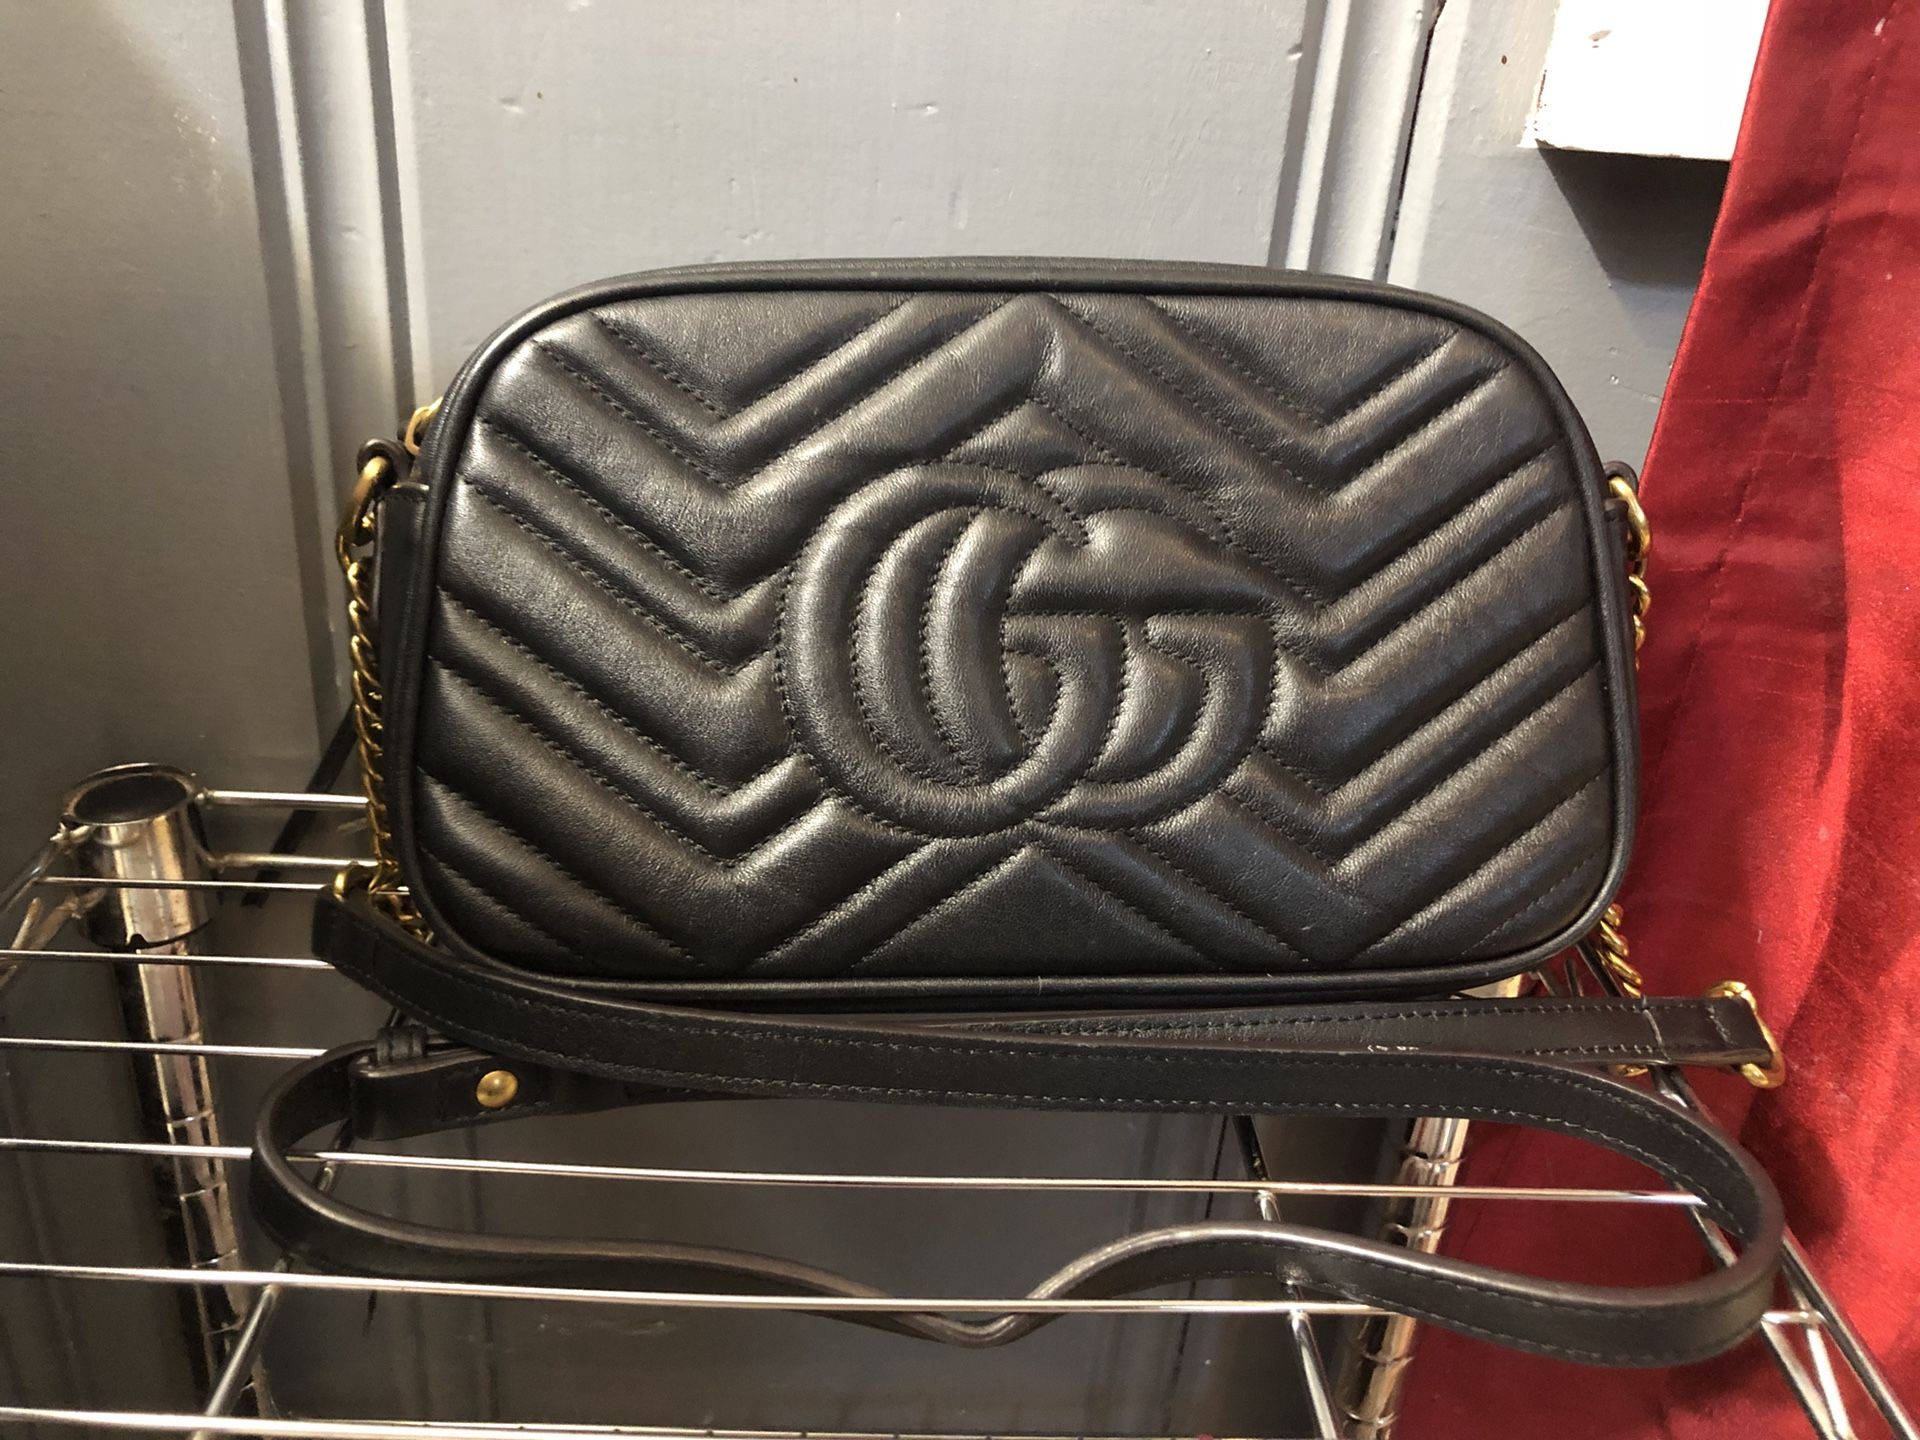 Authentic Gucci bag serial number Serial number labeled 001-4286 REAL GUCCI  BAG for Sale in Carpinteria, CA - OfferUp